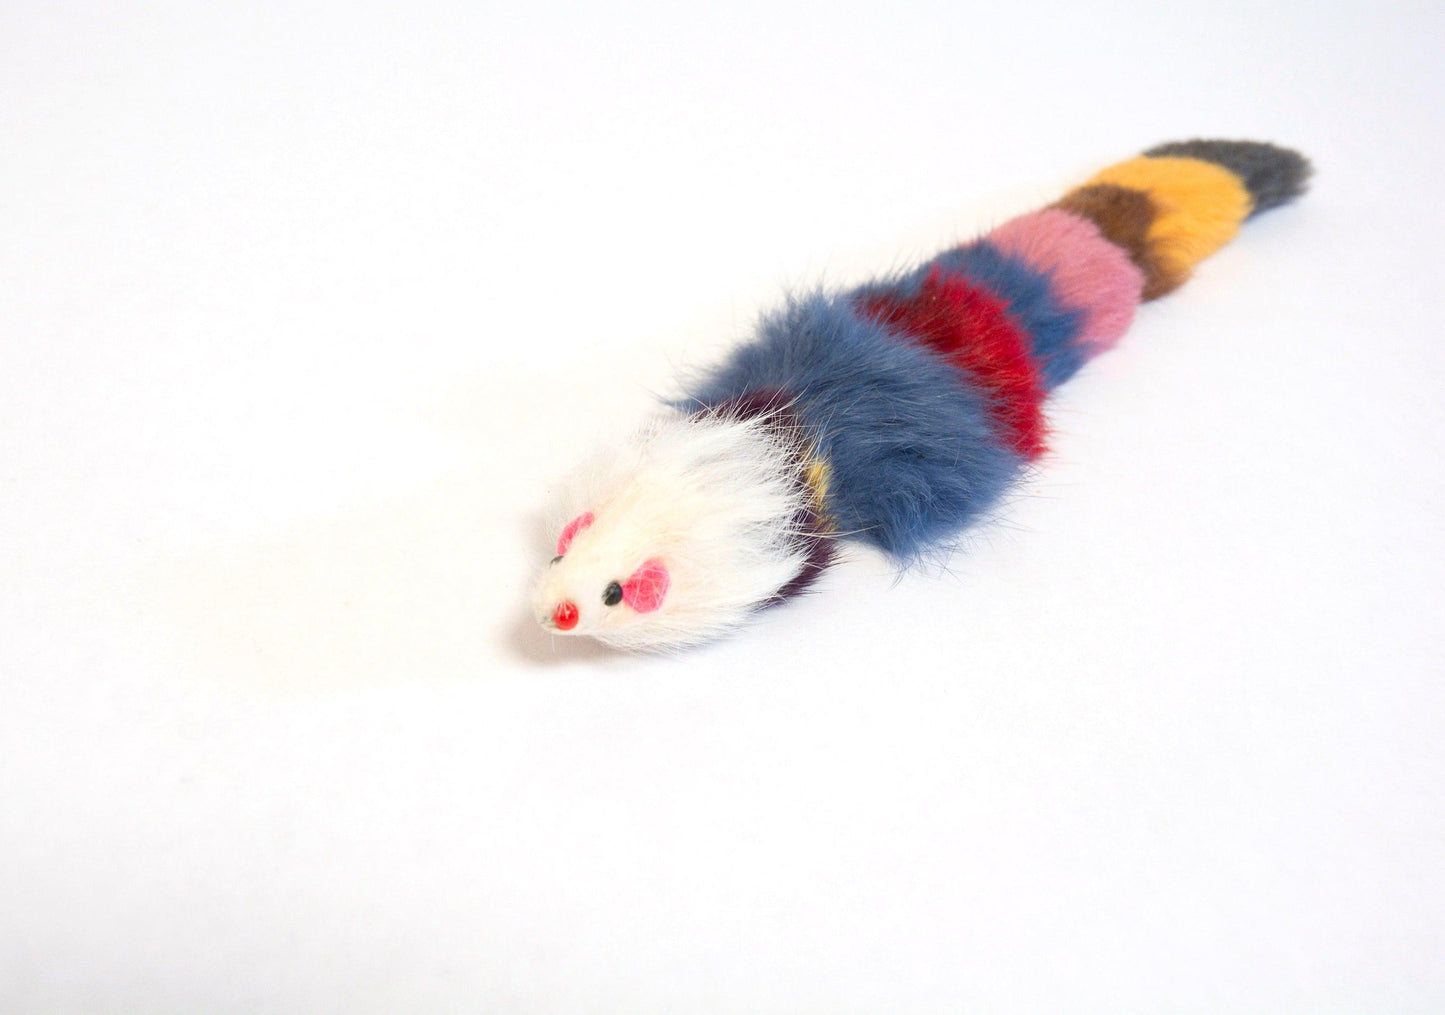 Set of Two Fur Weasel Toys (one Brown/White and one Multi-colored) - Iconic Pet, LLC